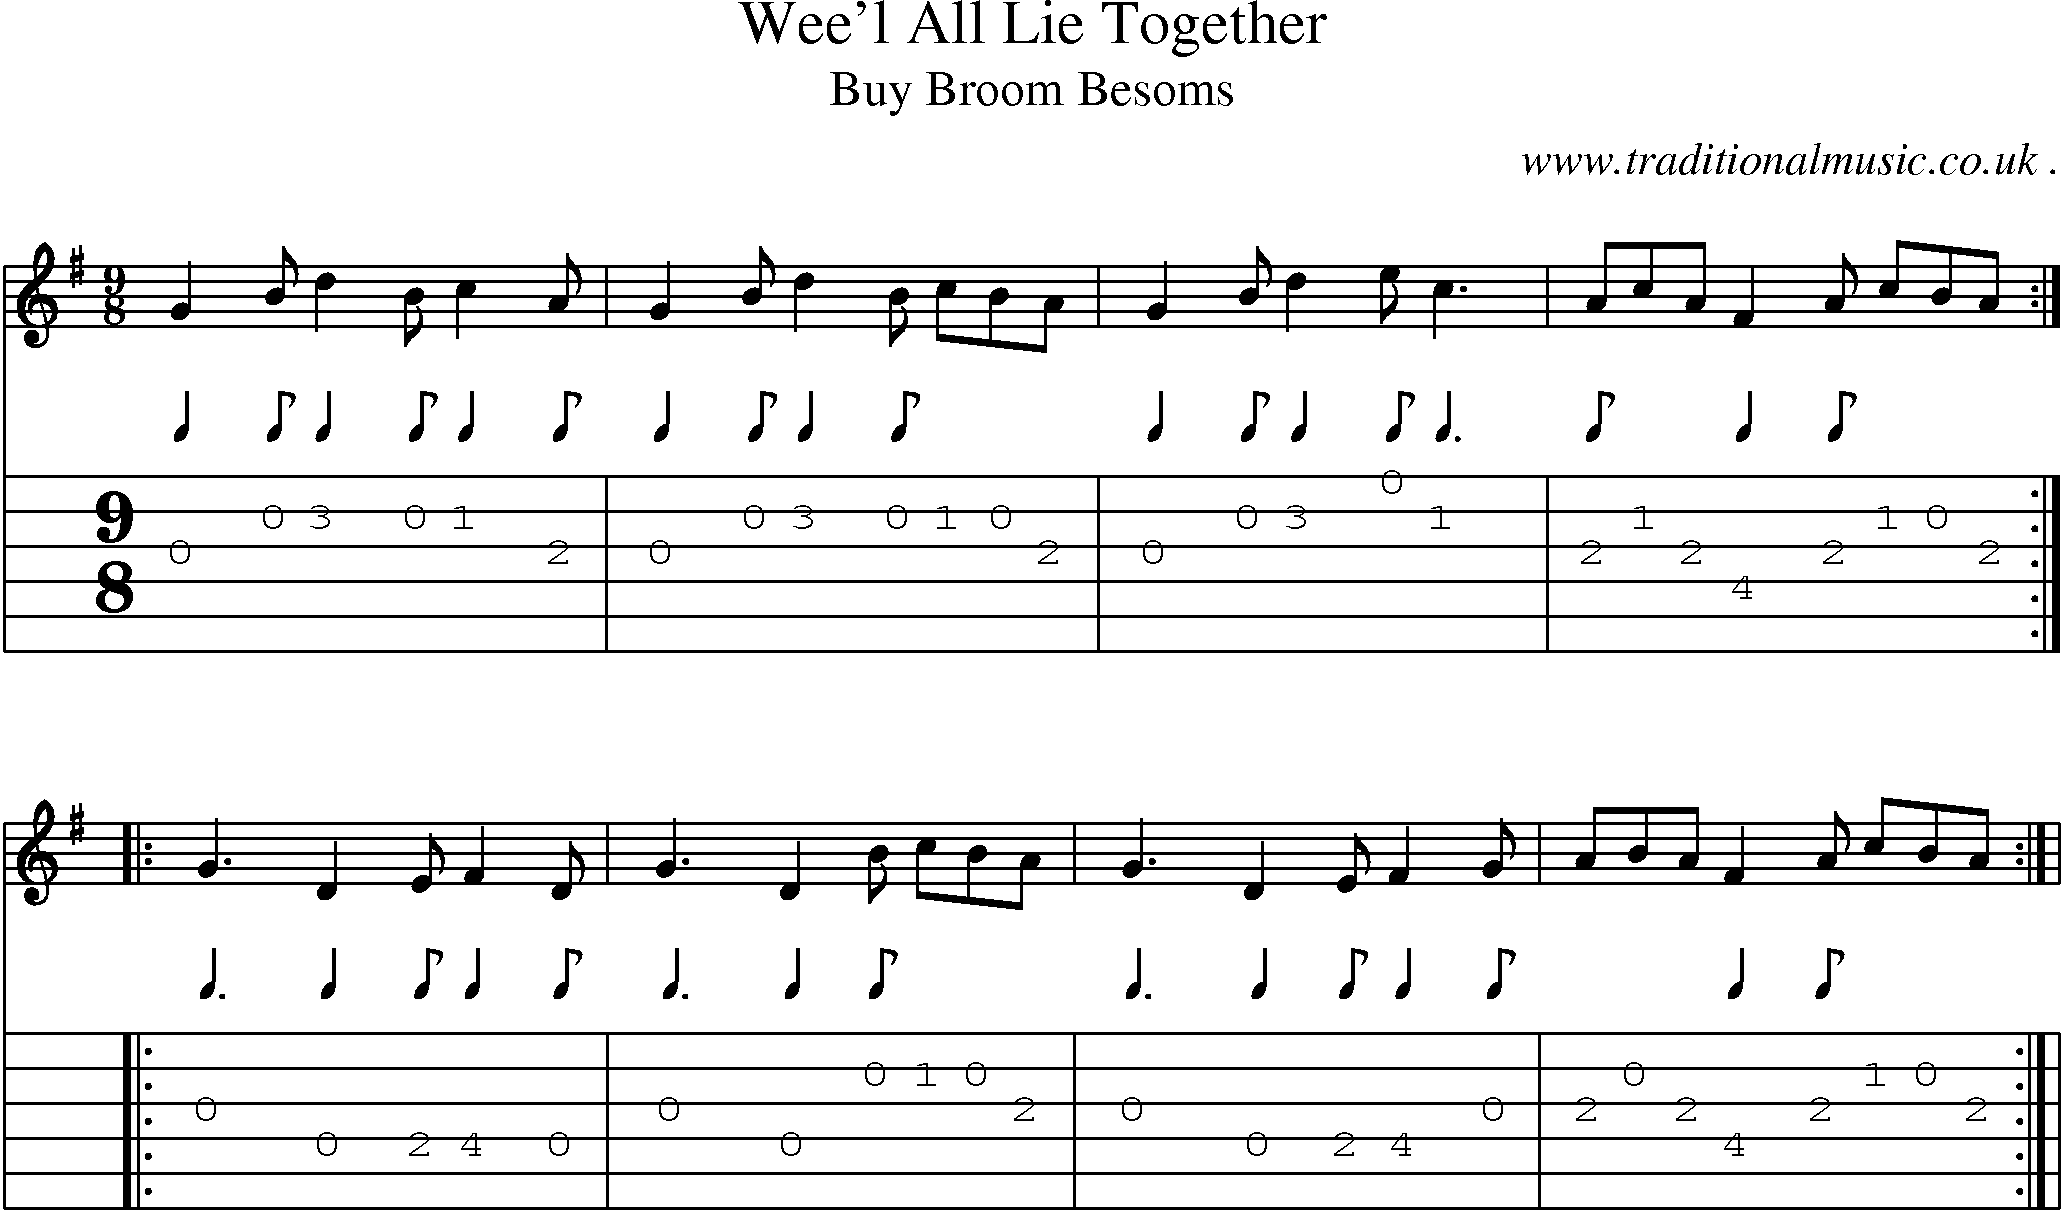 Sheet-Music and Guitar Tabs for Weel All Lie Together